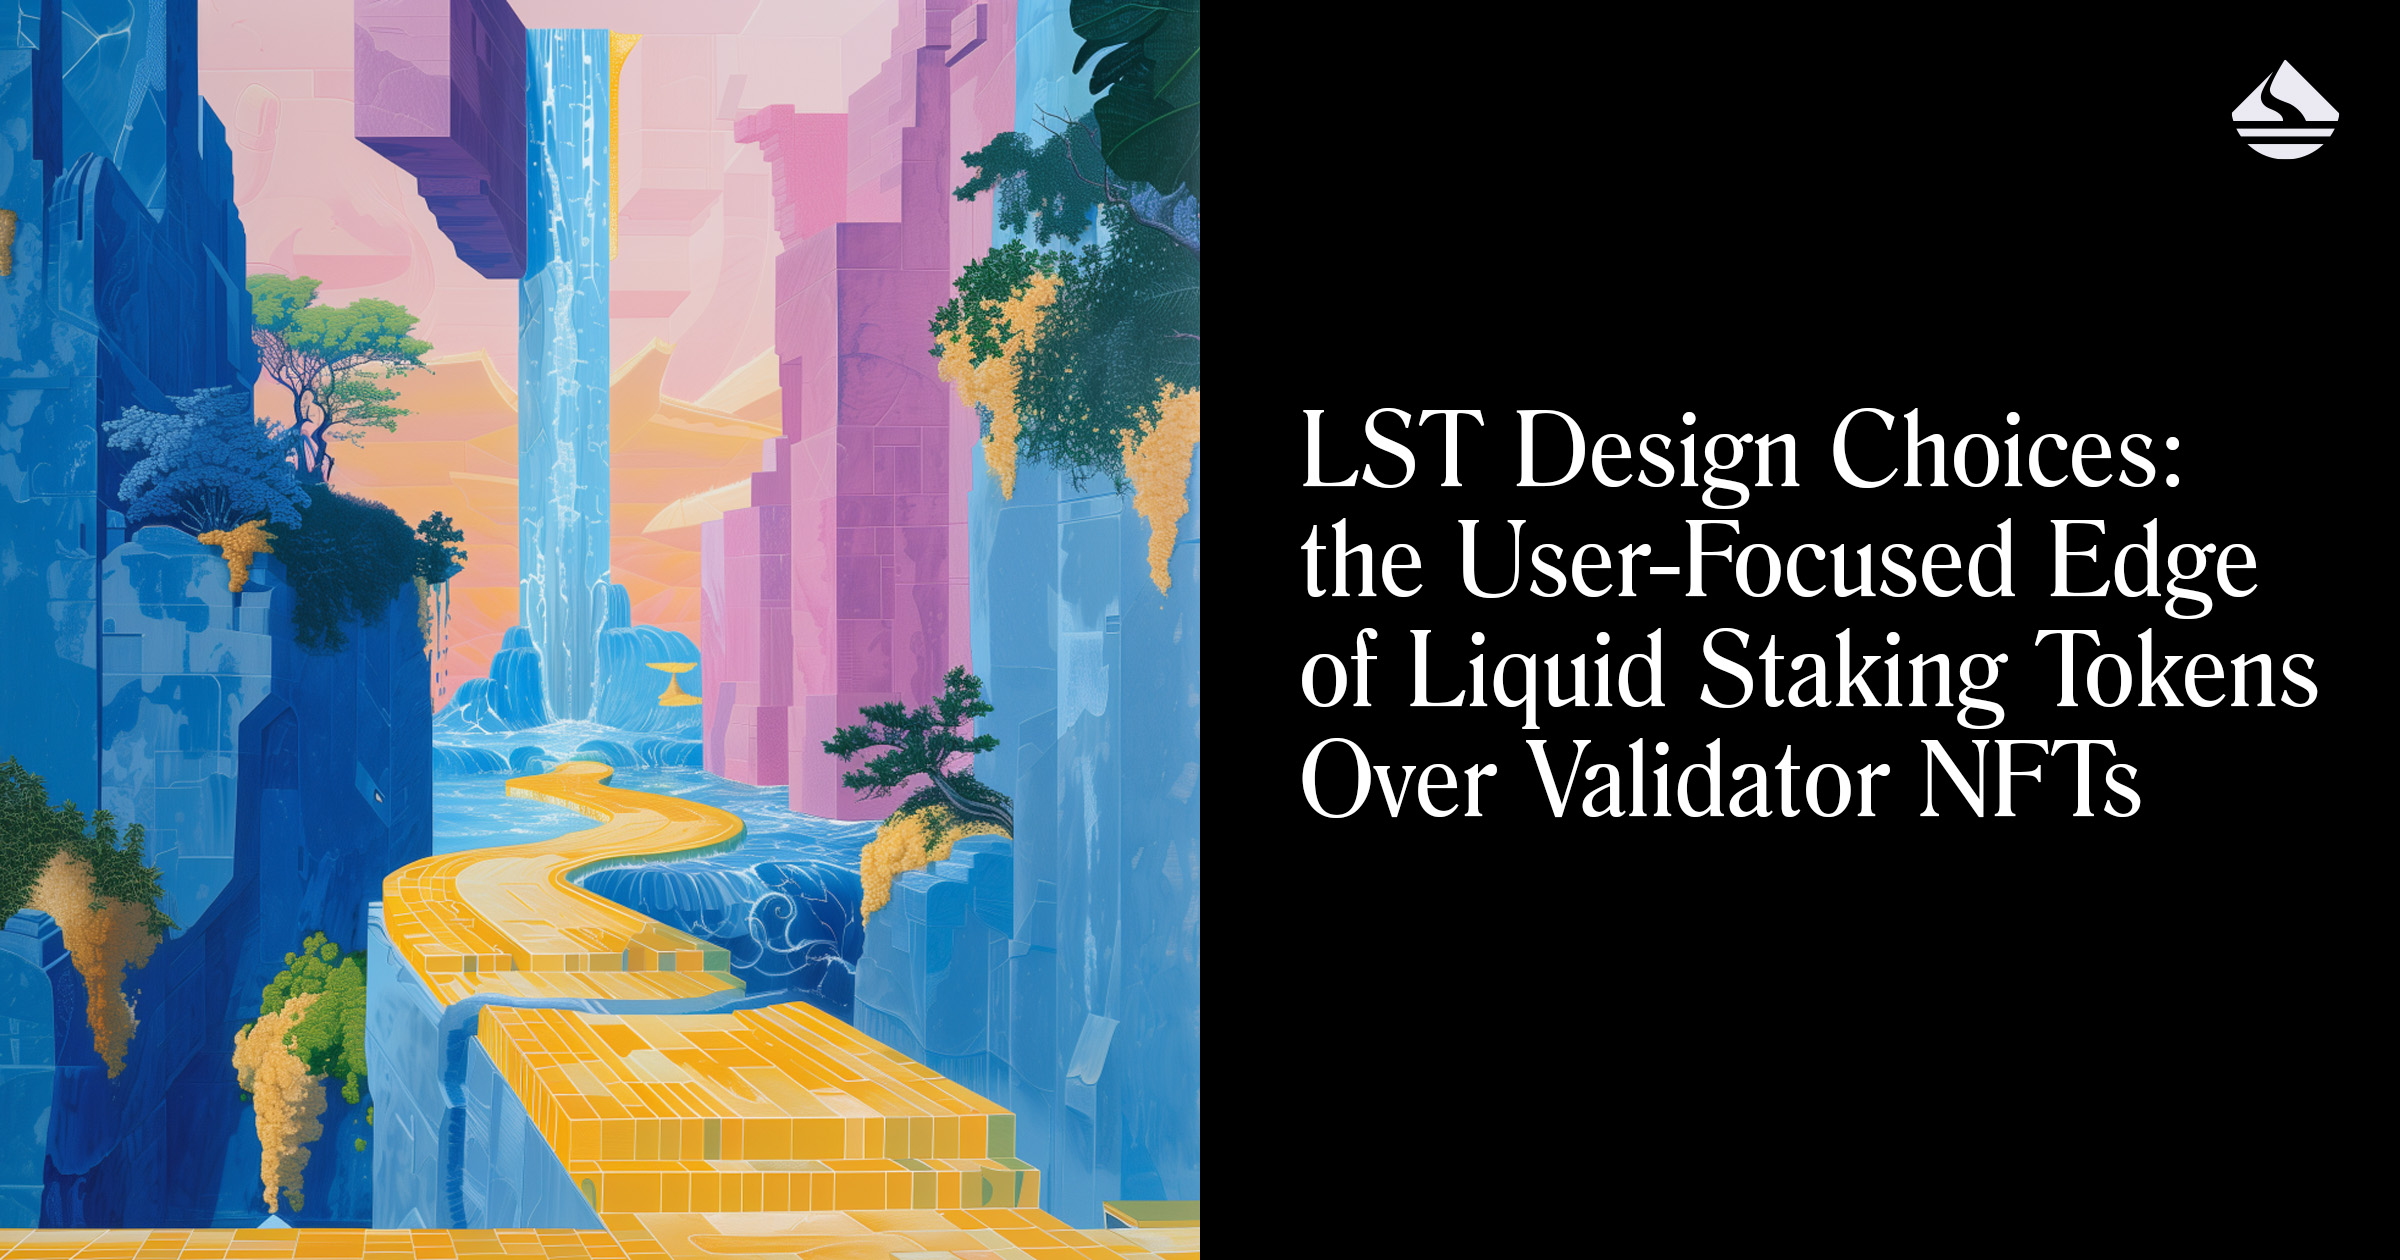 LST Design Choices: the User-Focused Edge of Liquid Staking Tokens Over Validator NFTs